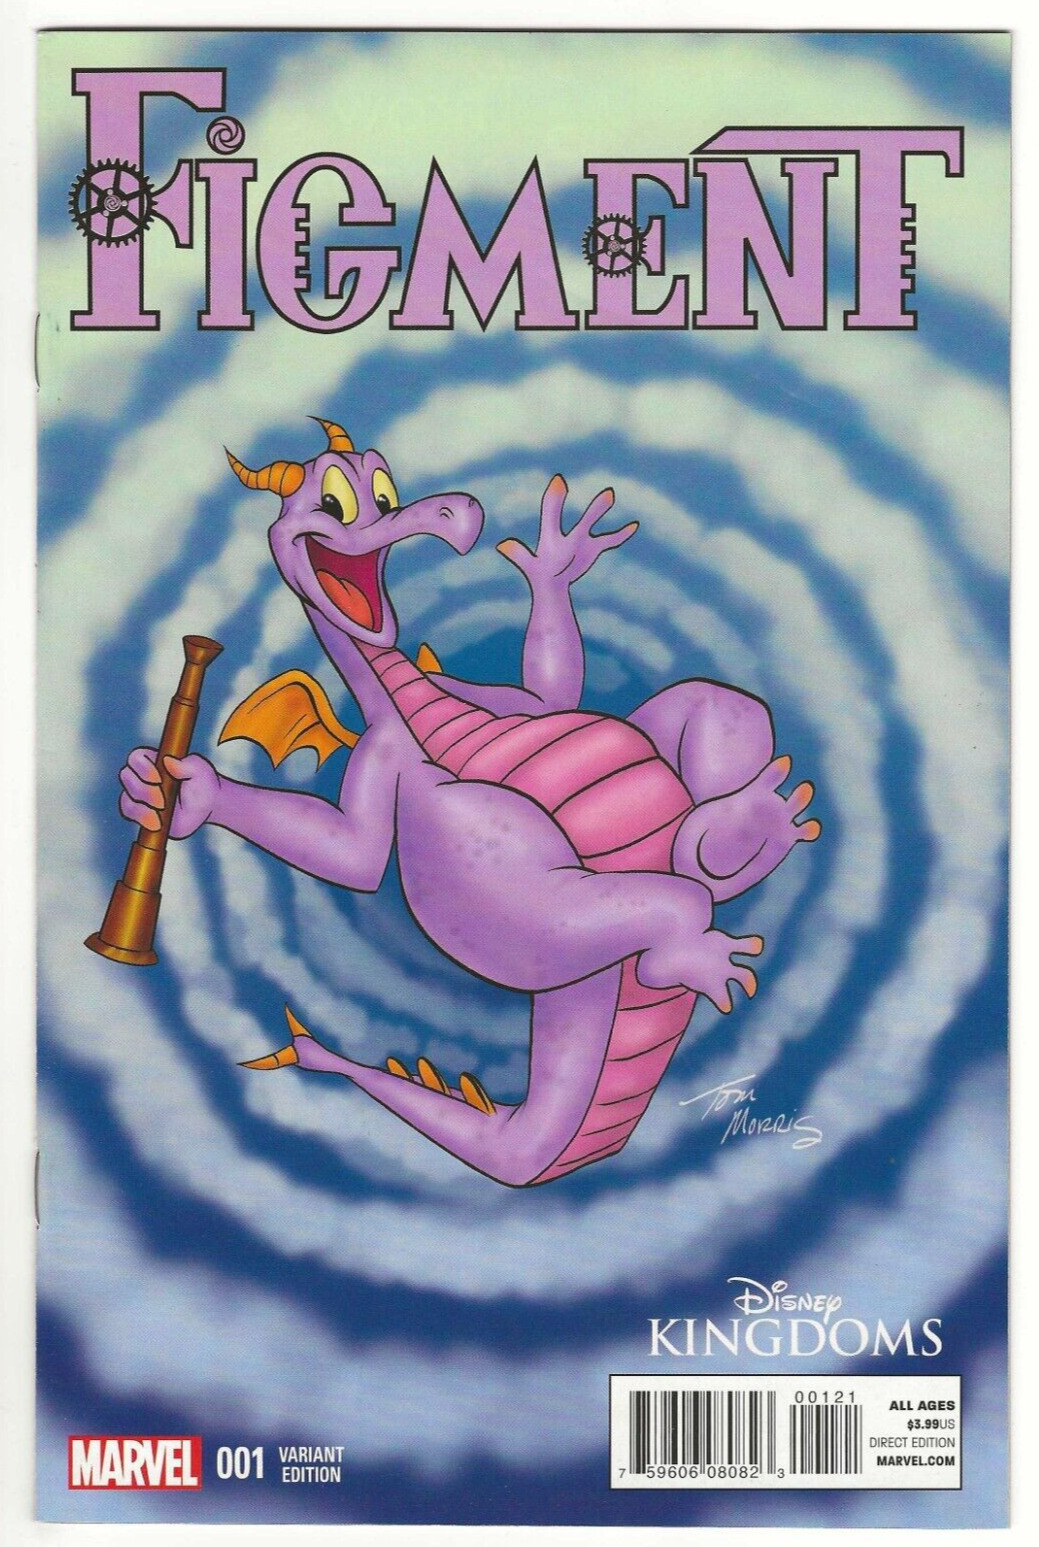 Marvel Comics FIGMENT #1 first printing 1:25 Morris cover